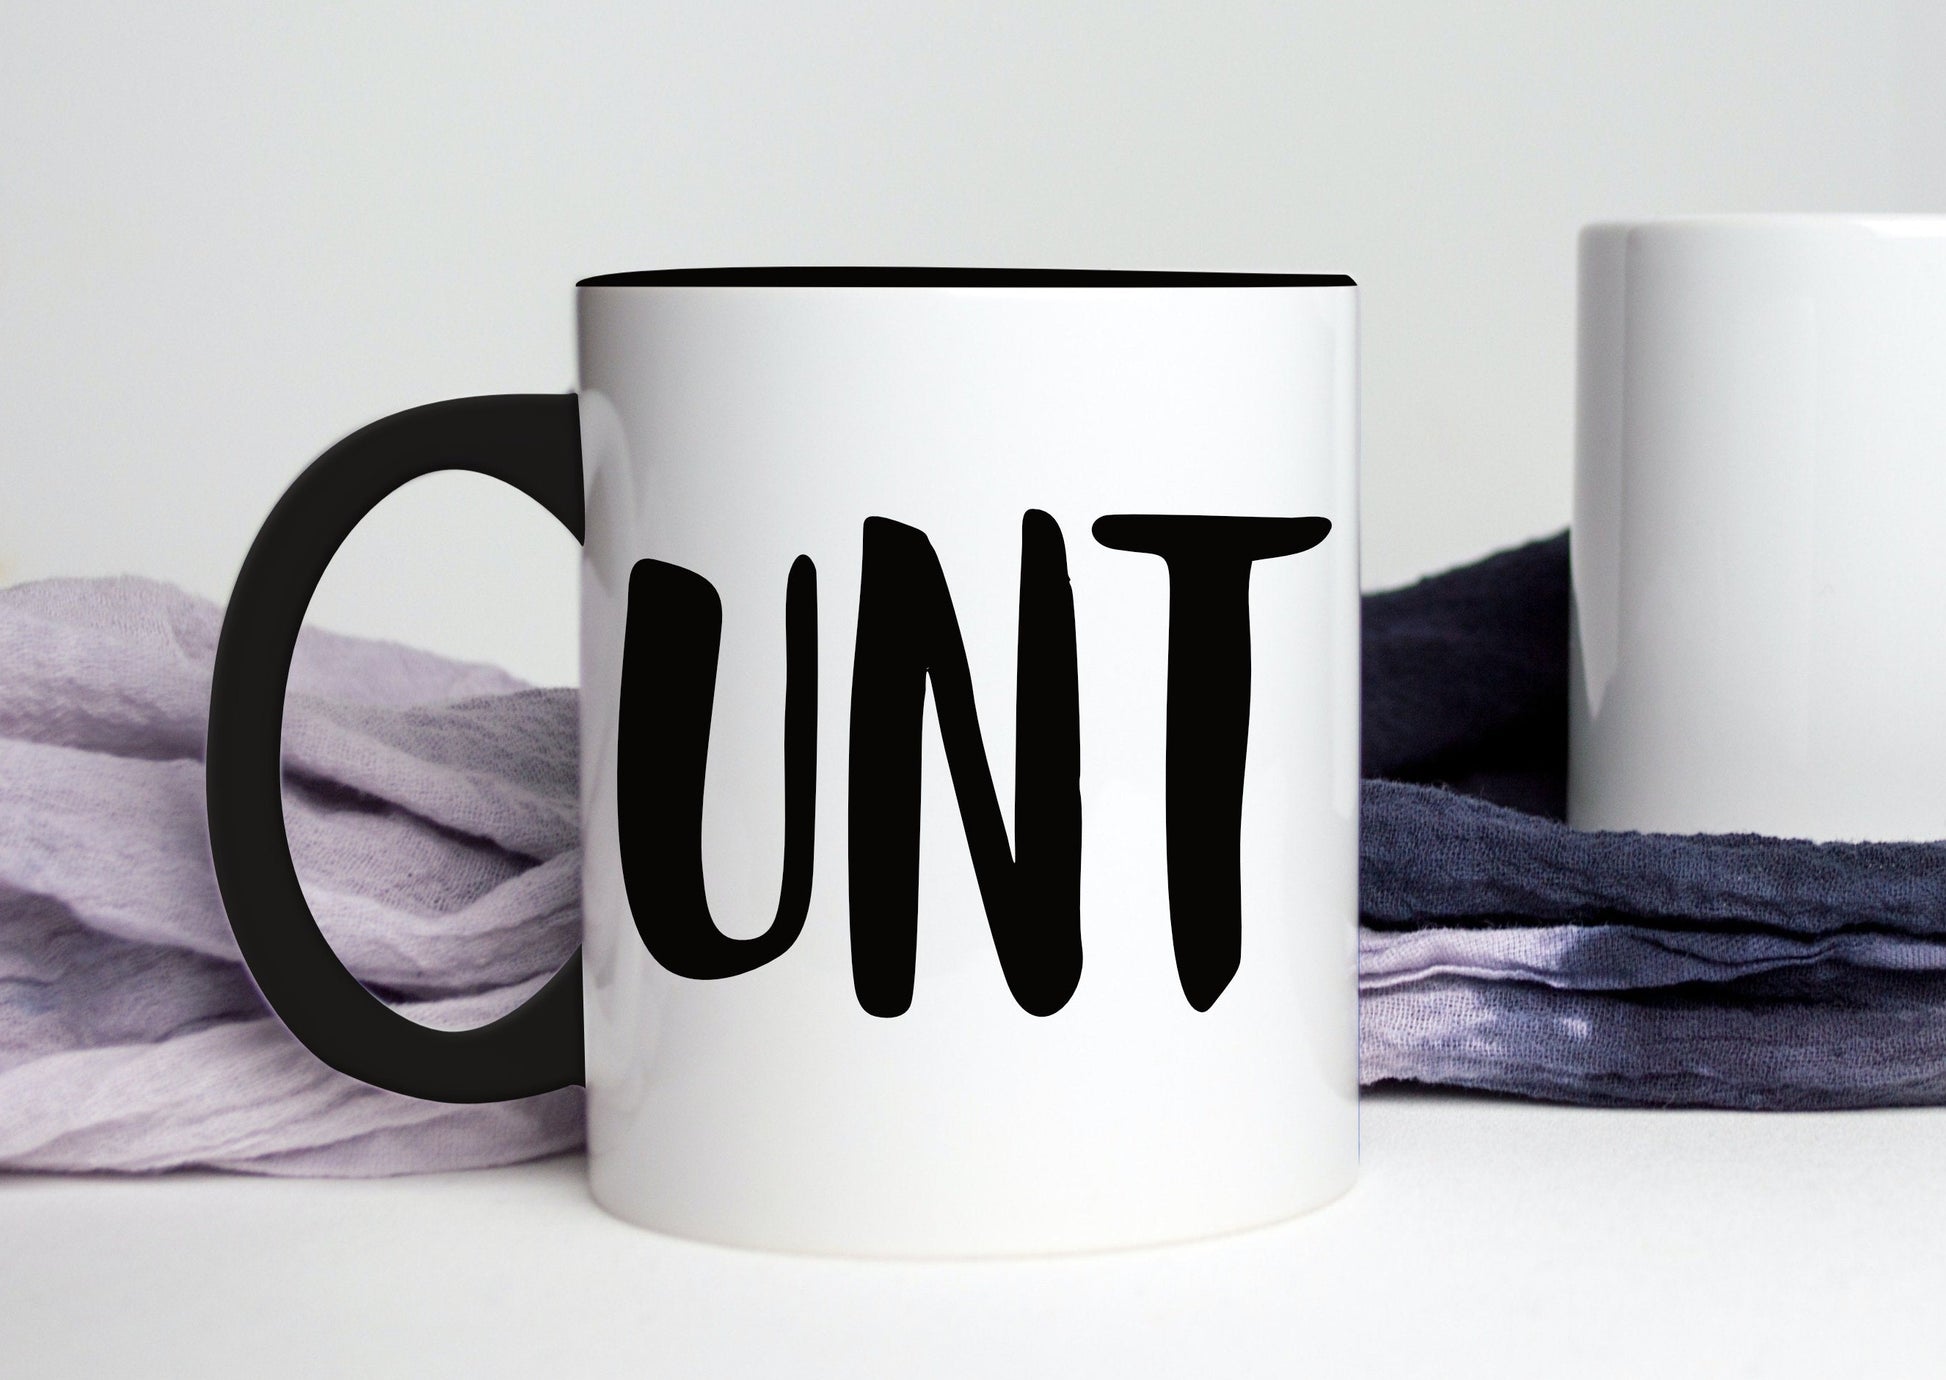 A white ceramic mug with a black handle featuring a funny profanity quote to the front UNT, printed in black ink.